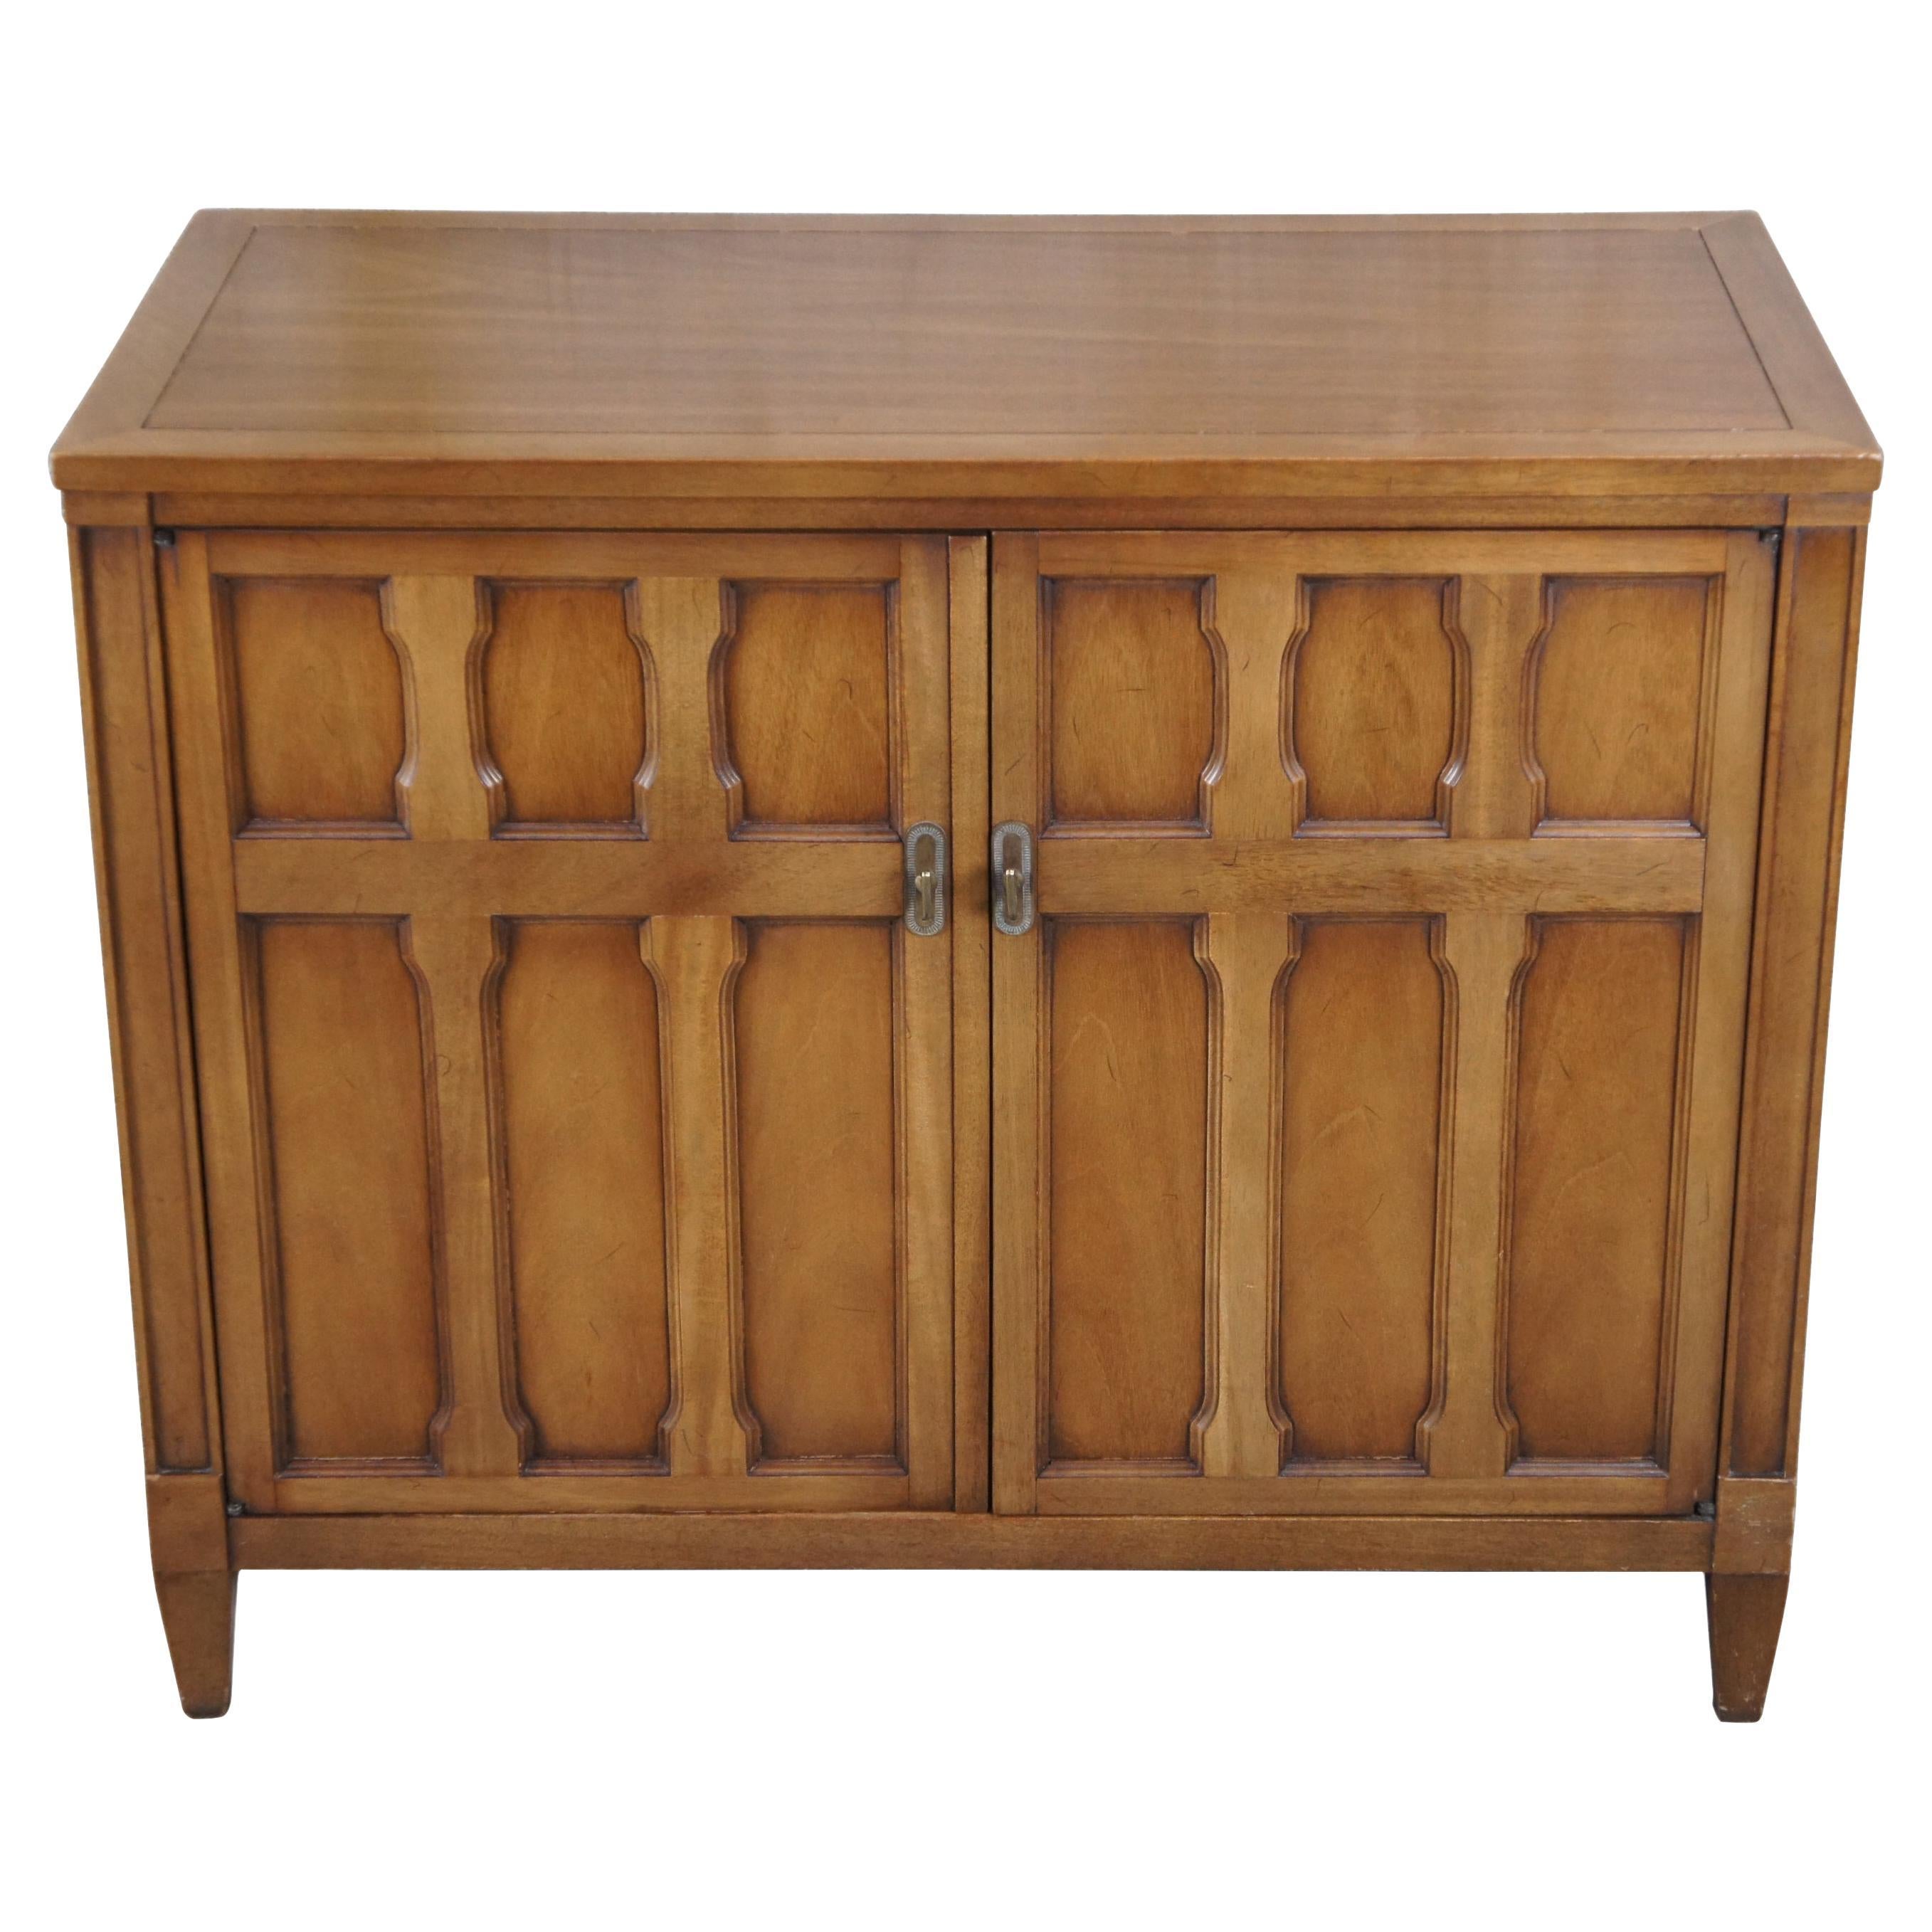 Drexel Triune Mid-Century Modern Mahogany Buffet Server Console Cabinet 585-407 For Sale